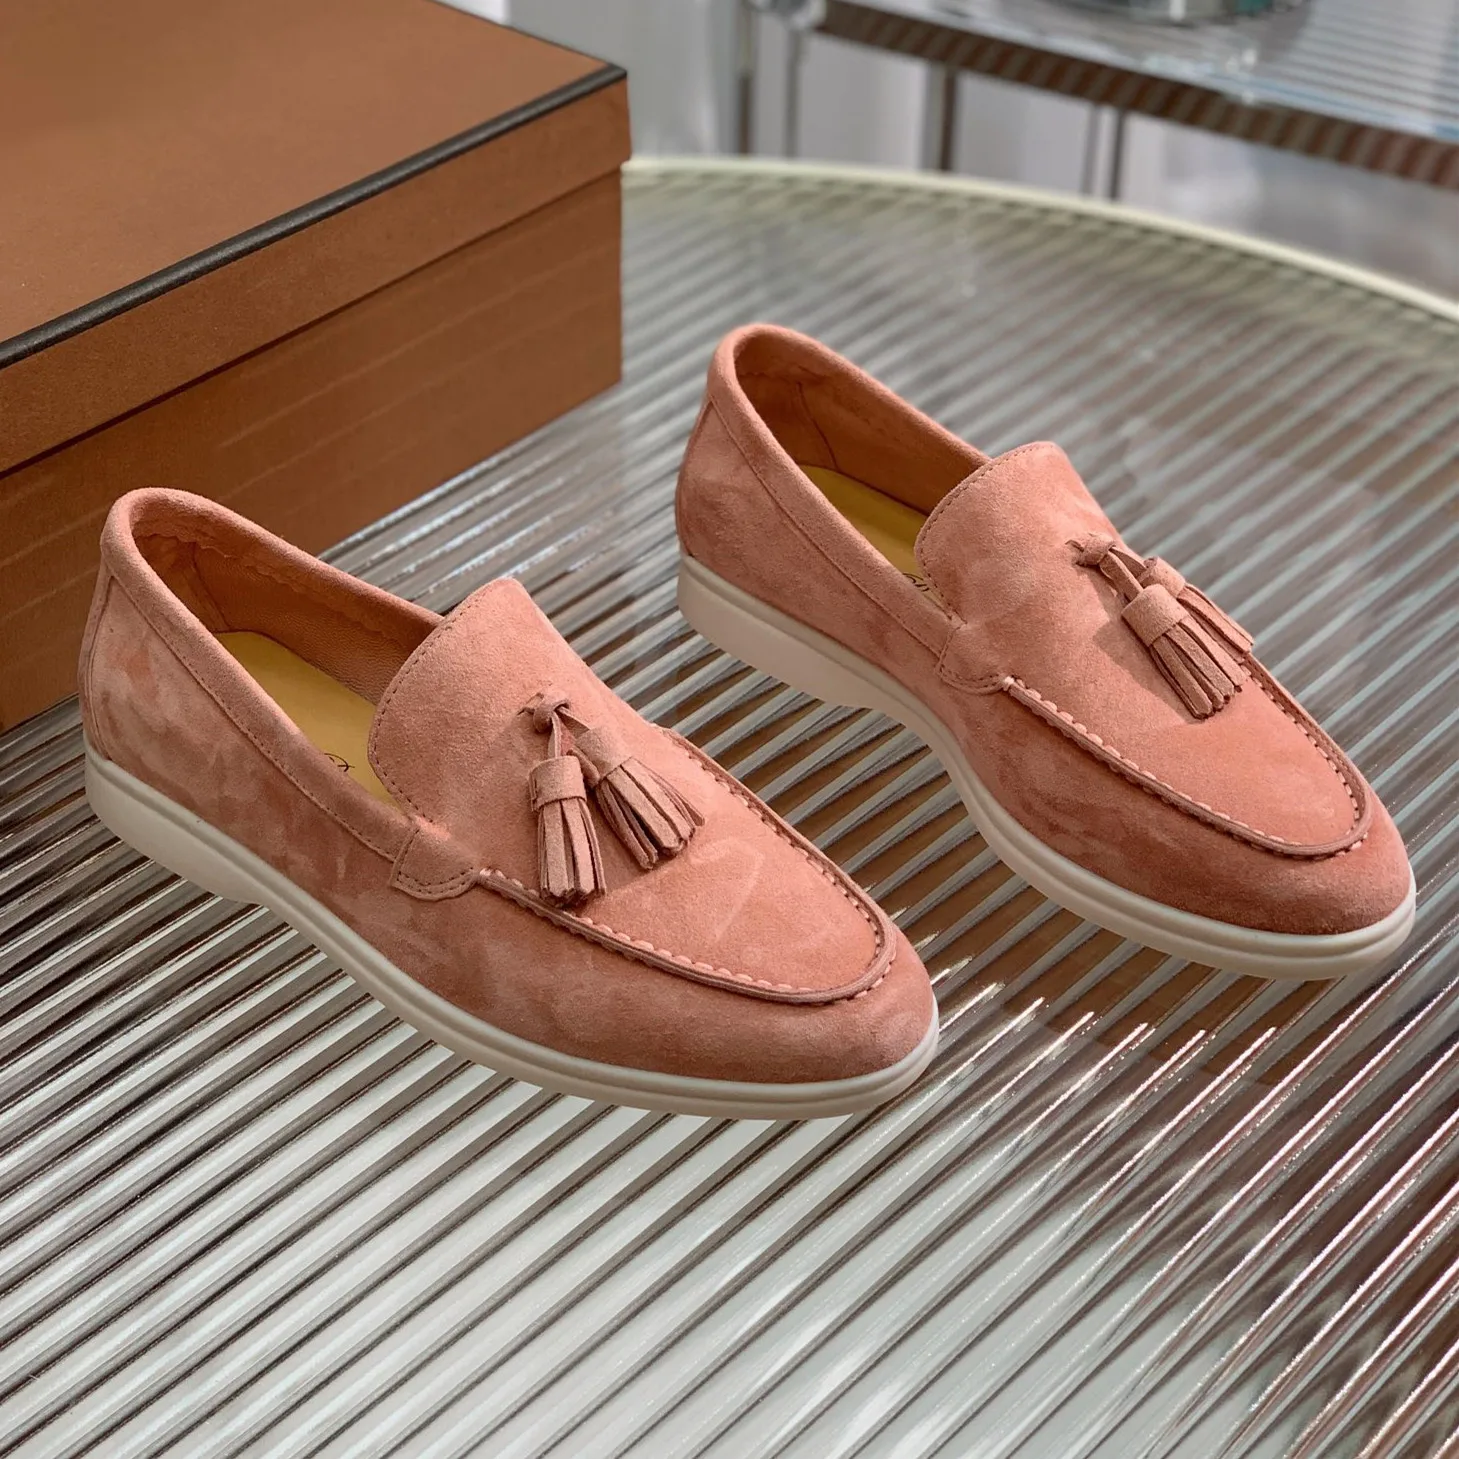 

luxury High quality suede Loafers 2023 Summer New Walking Shoes Women's Flat Bottom Casual Moccasins Driving Shoes Lefu Shoes